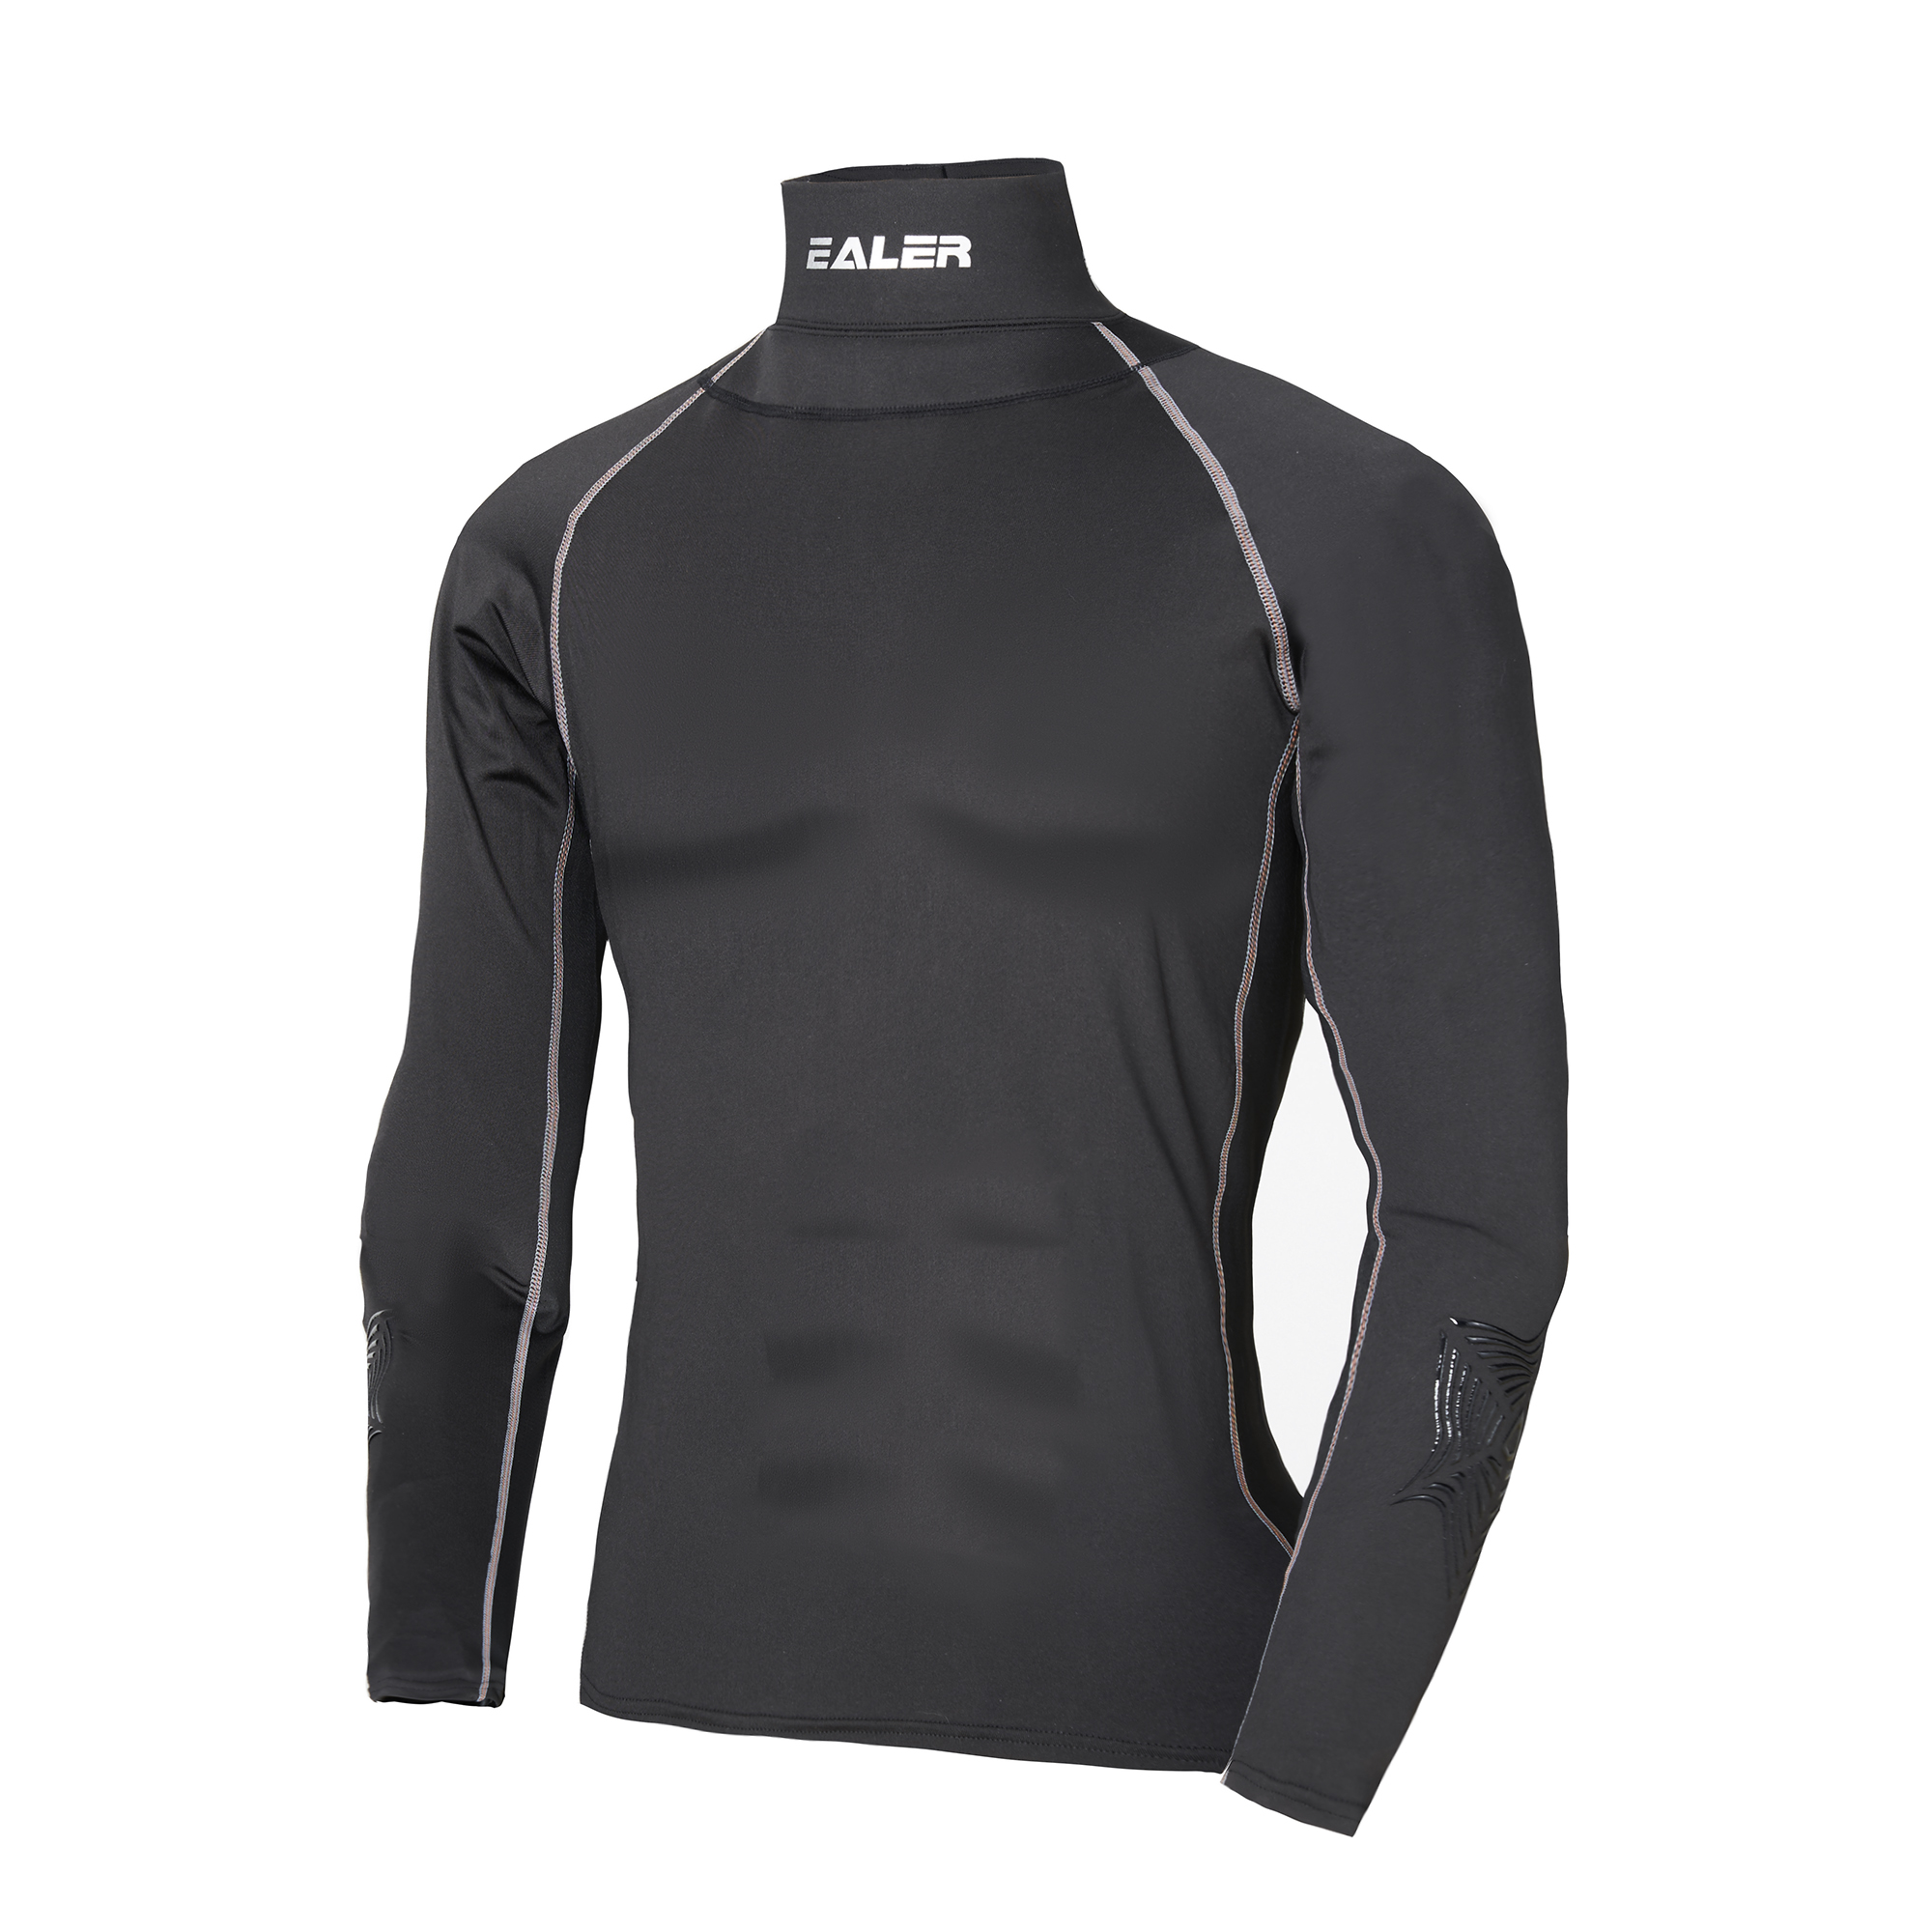 Hockey Compression Shirt with Neck Guard, Neck